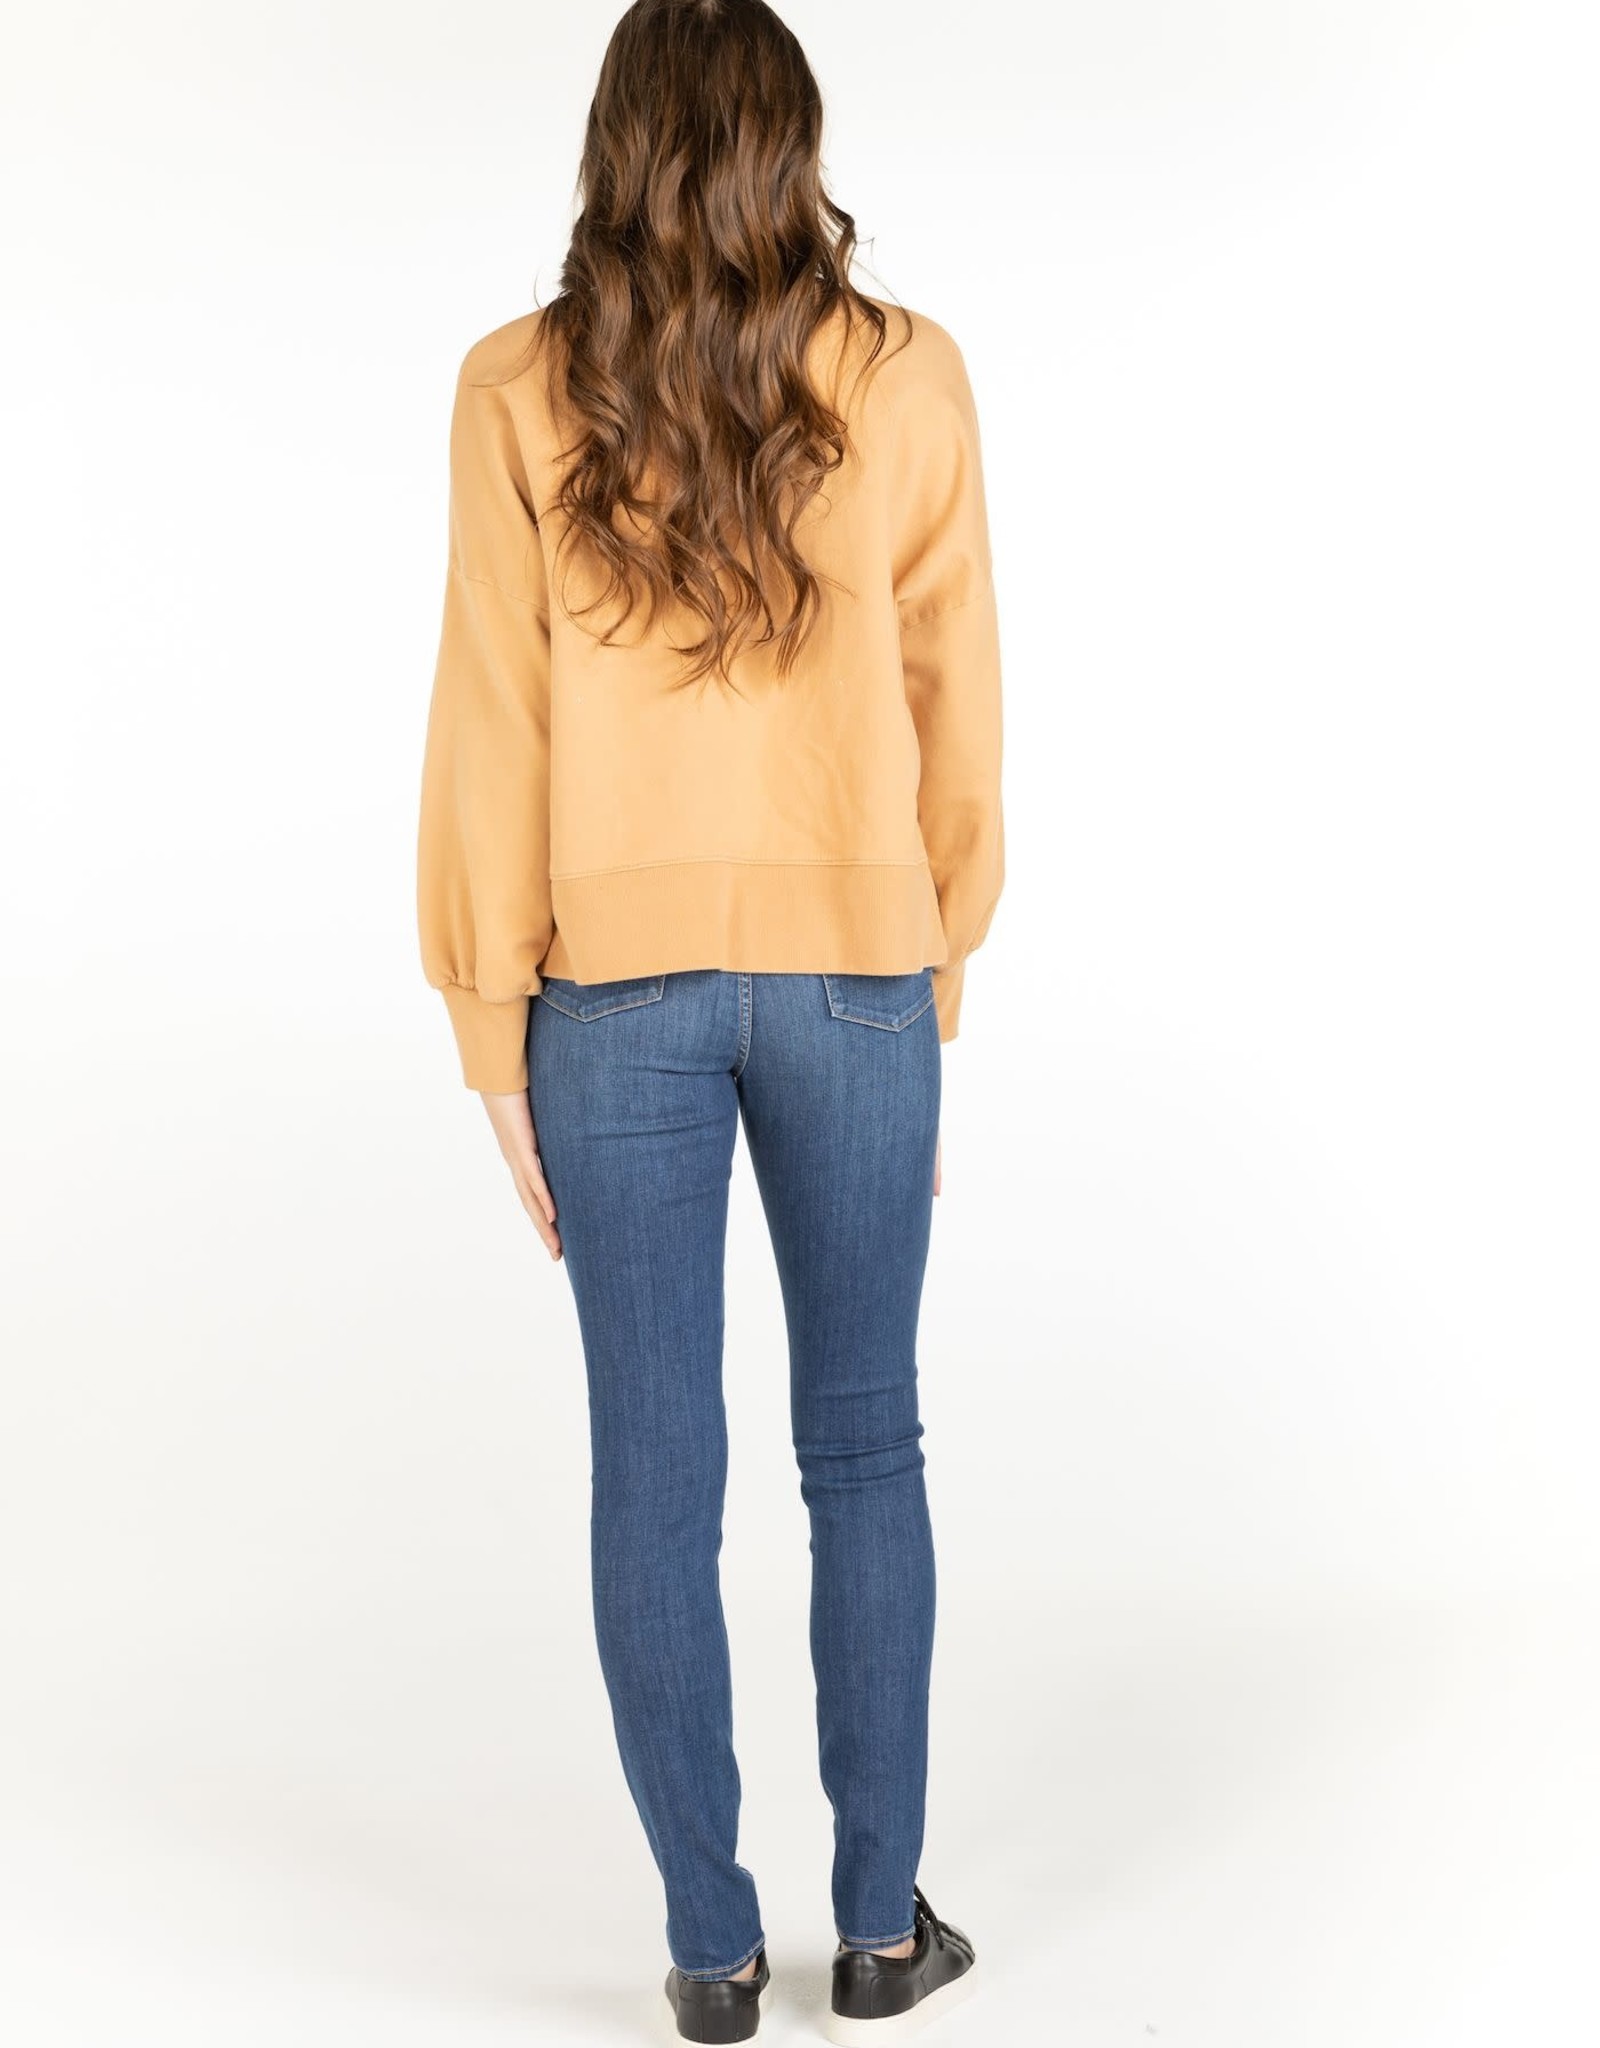 Articles of Society Amy High Rise Jeans